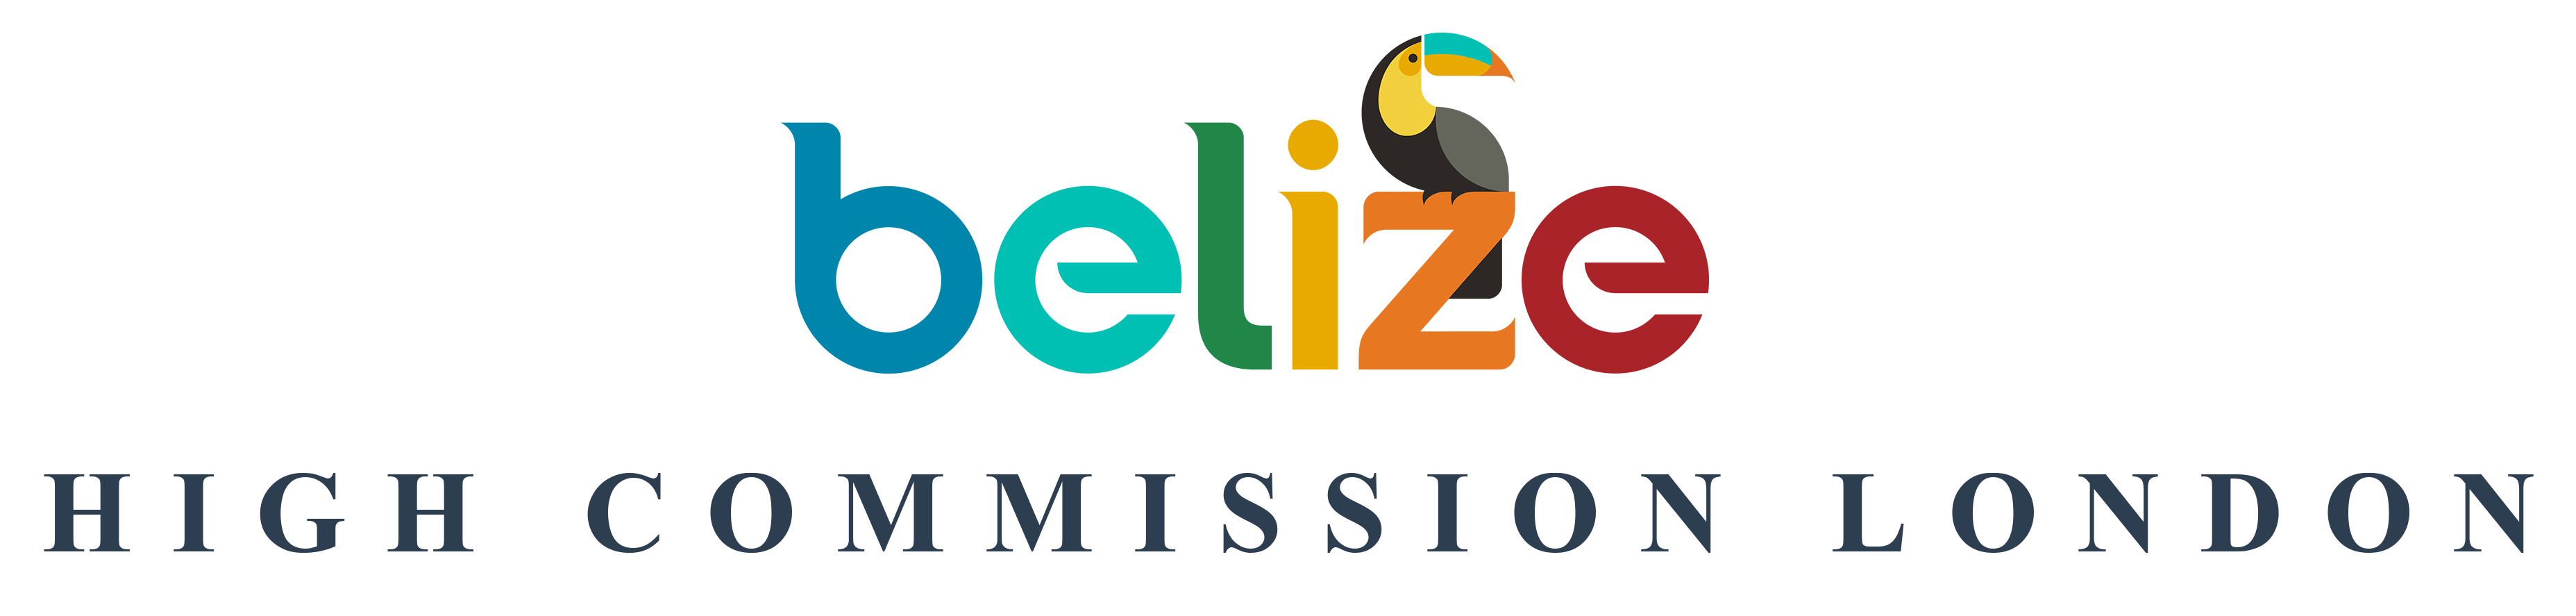 The Belize High Commission, London Logo